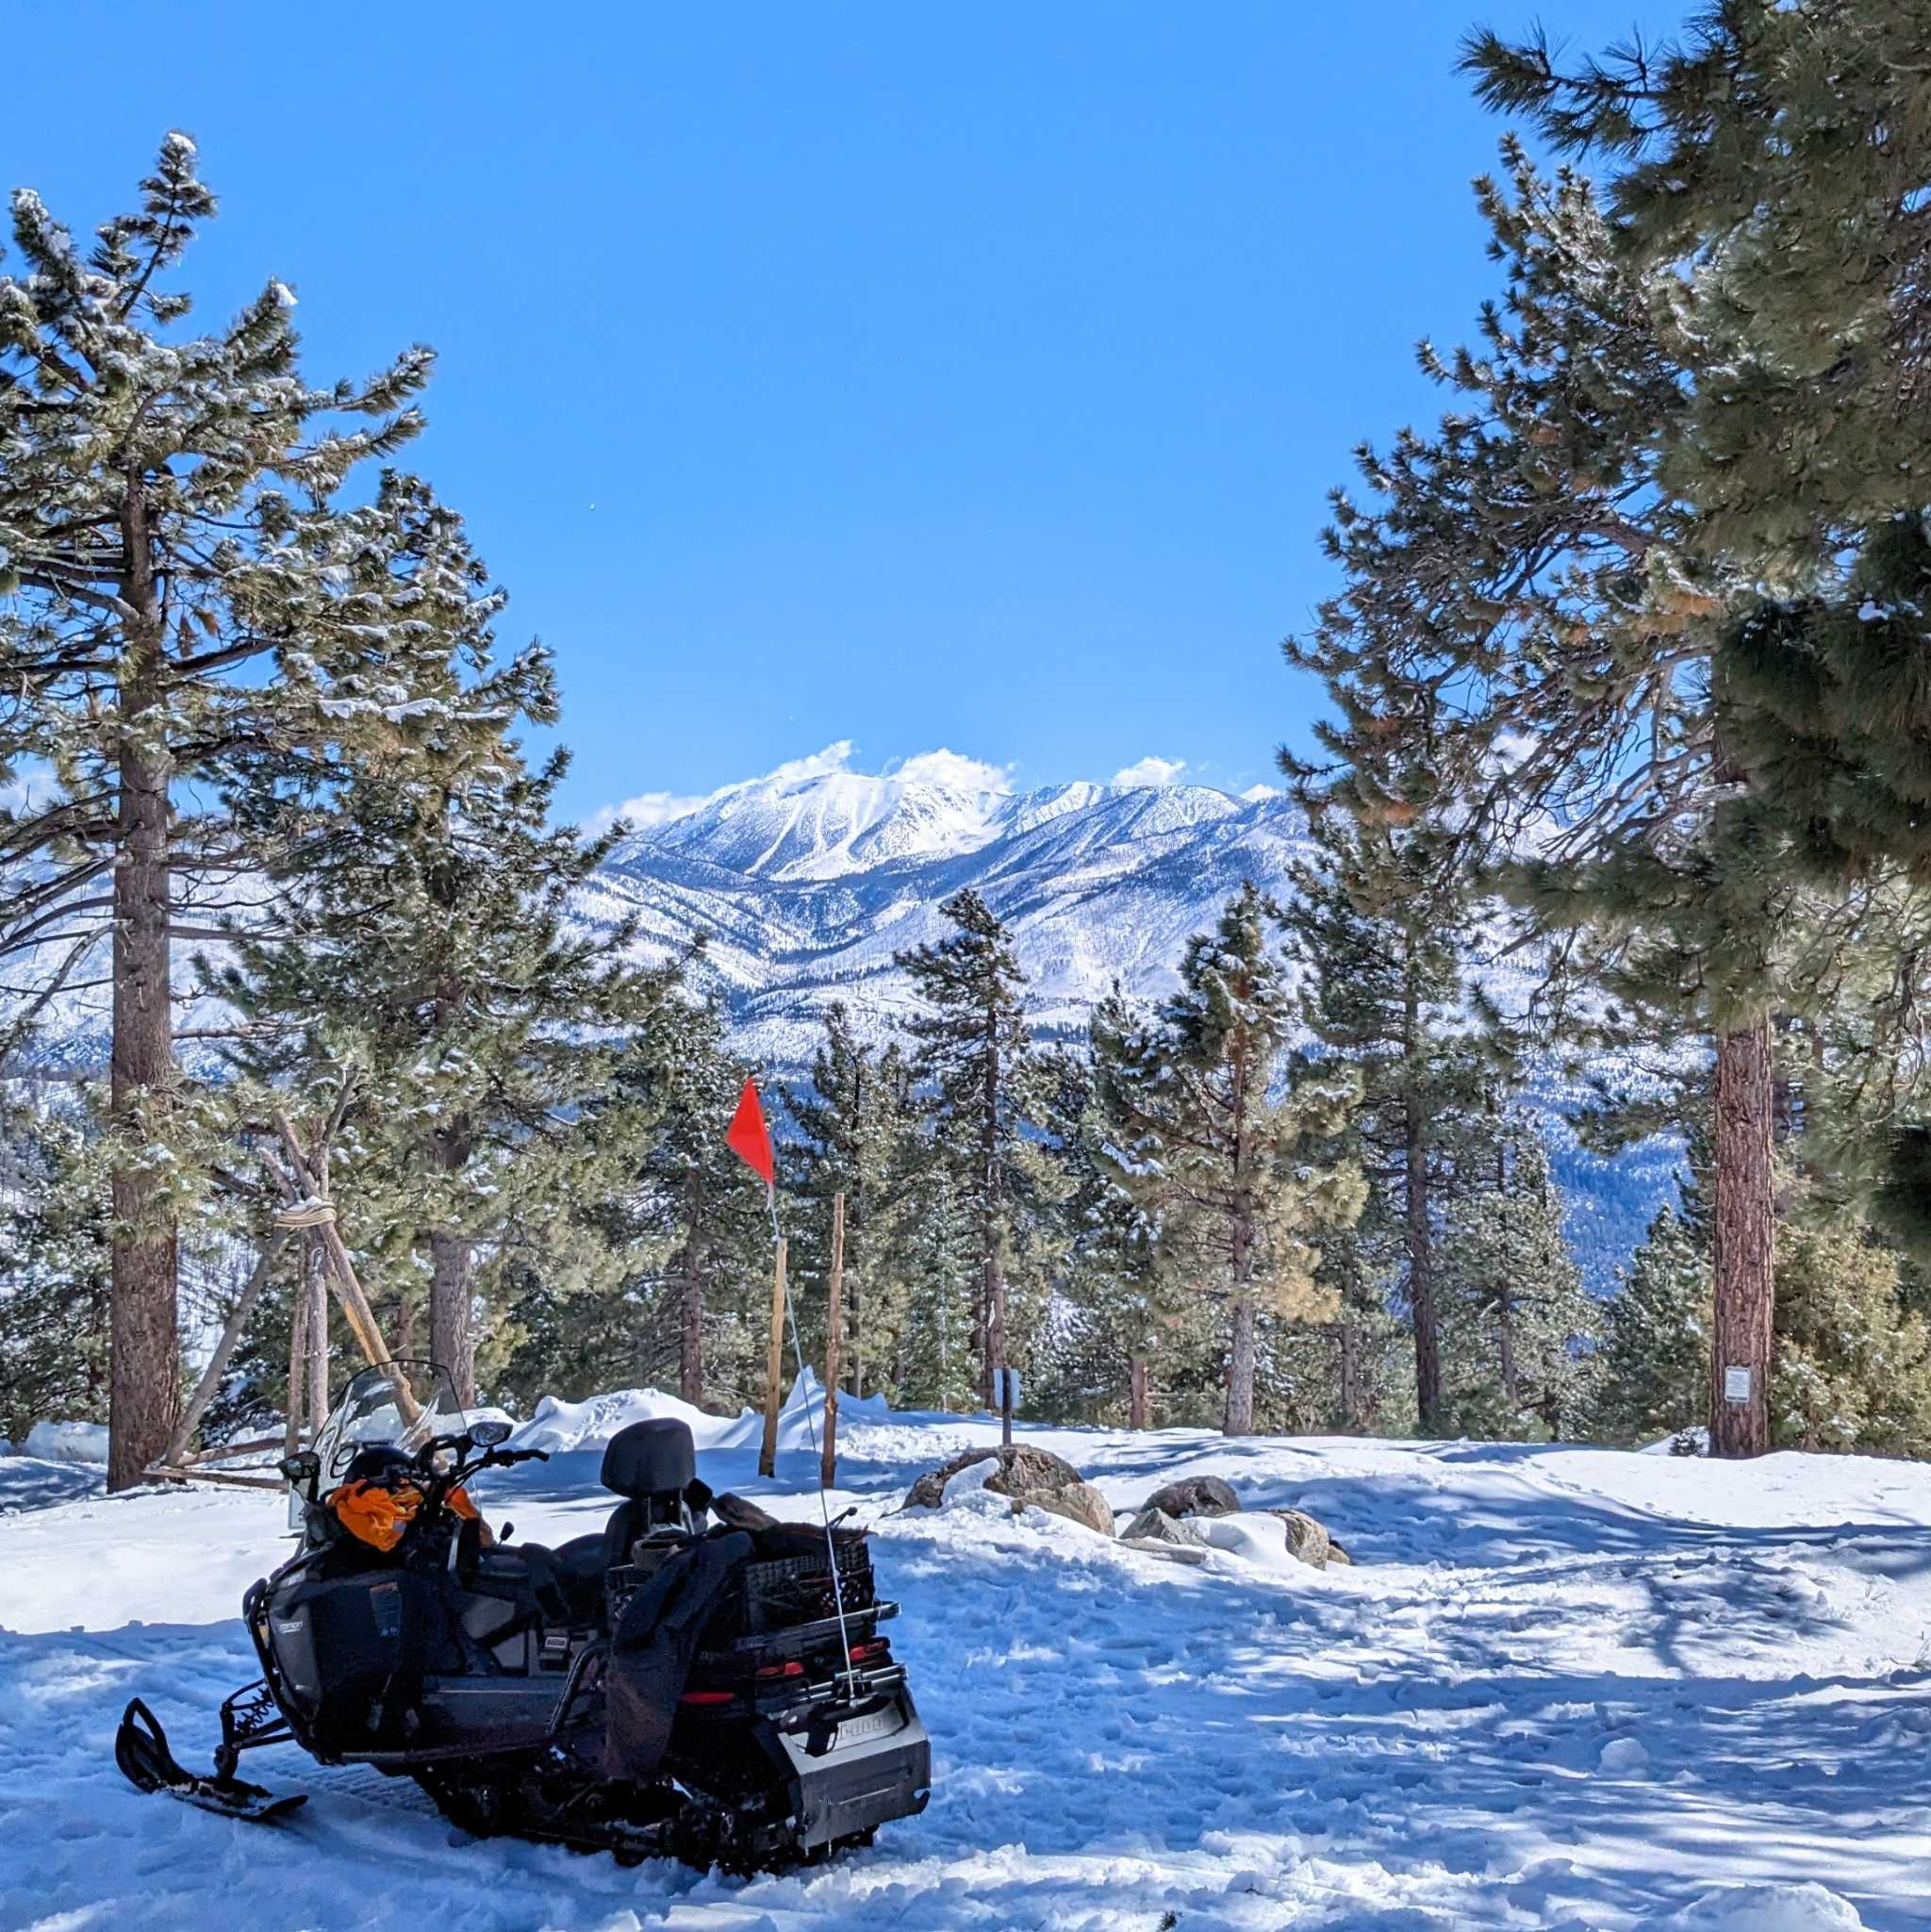 View of a snow covered mountain from between evergreen trees on an also snowy mountain top with a snowmobile.